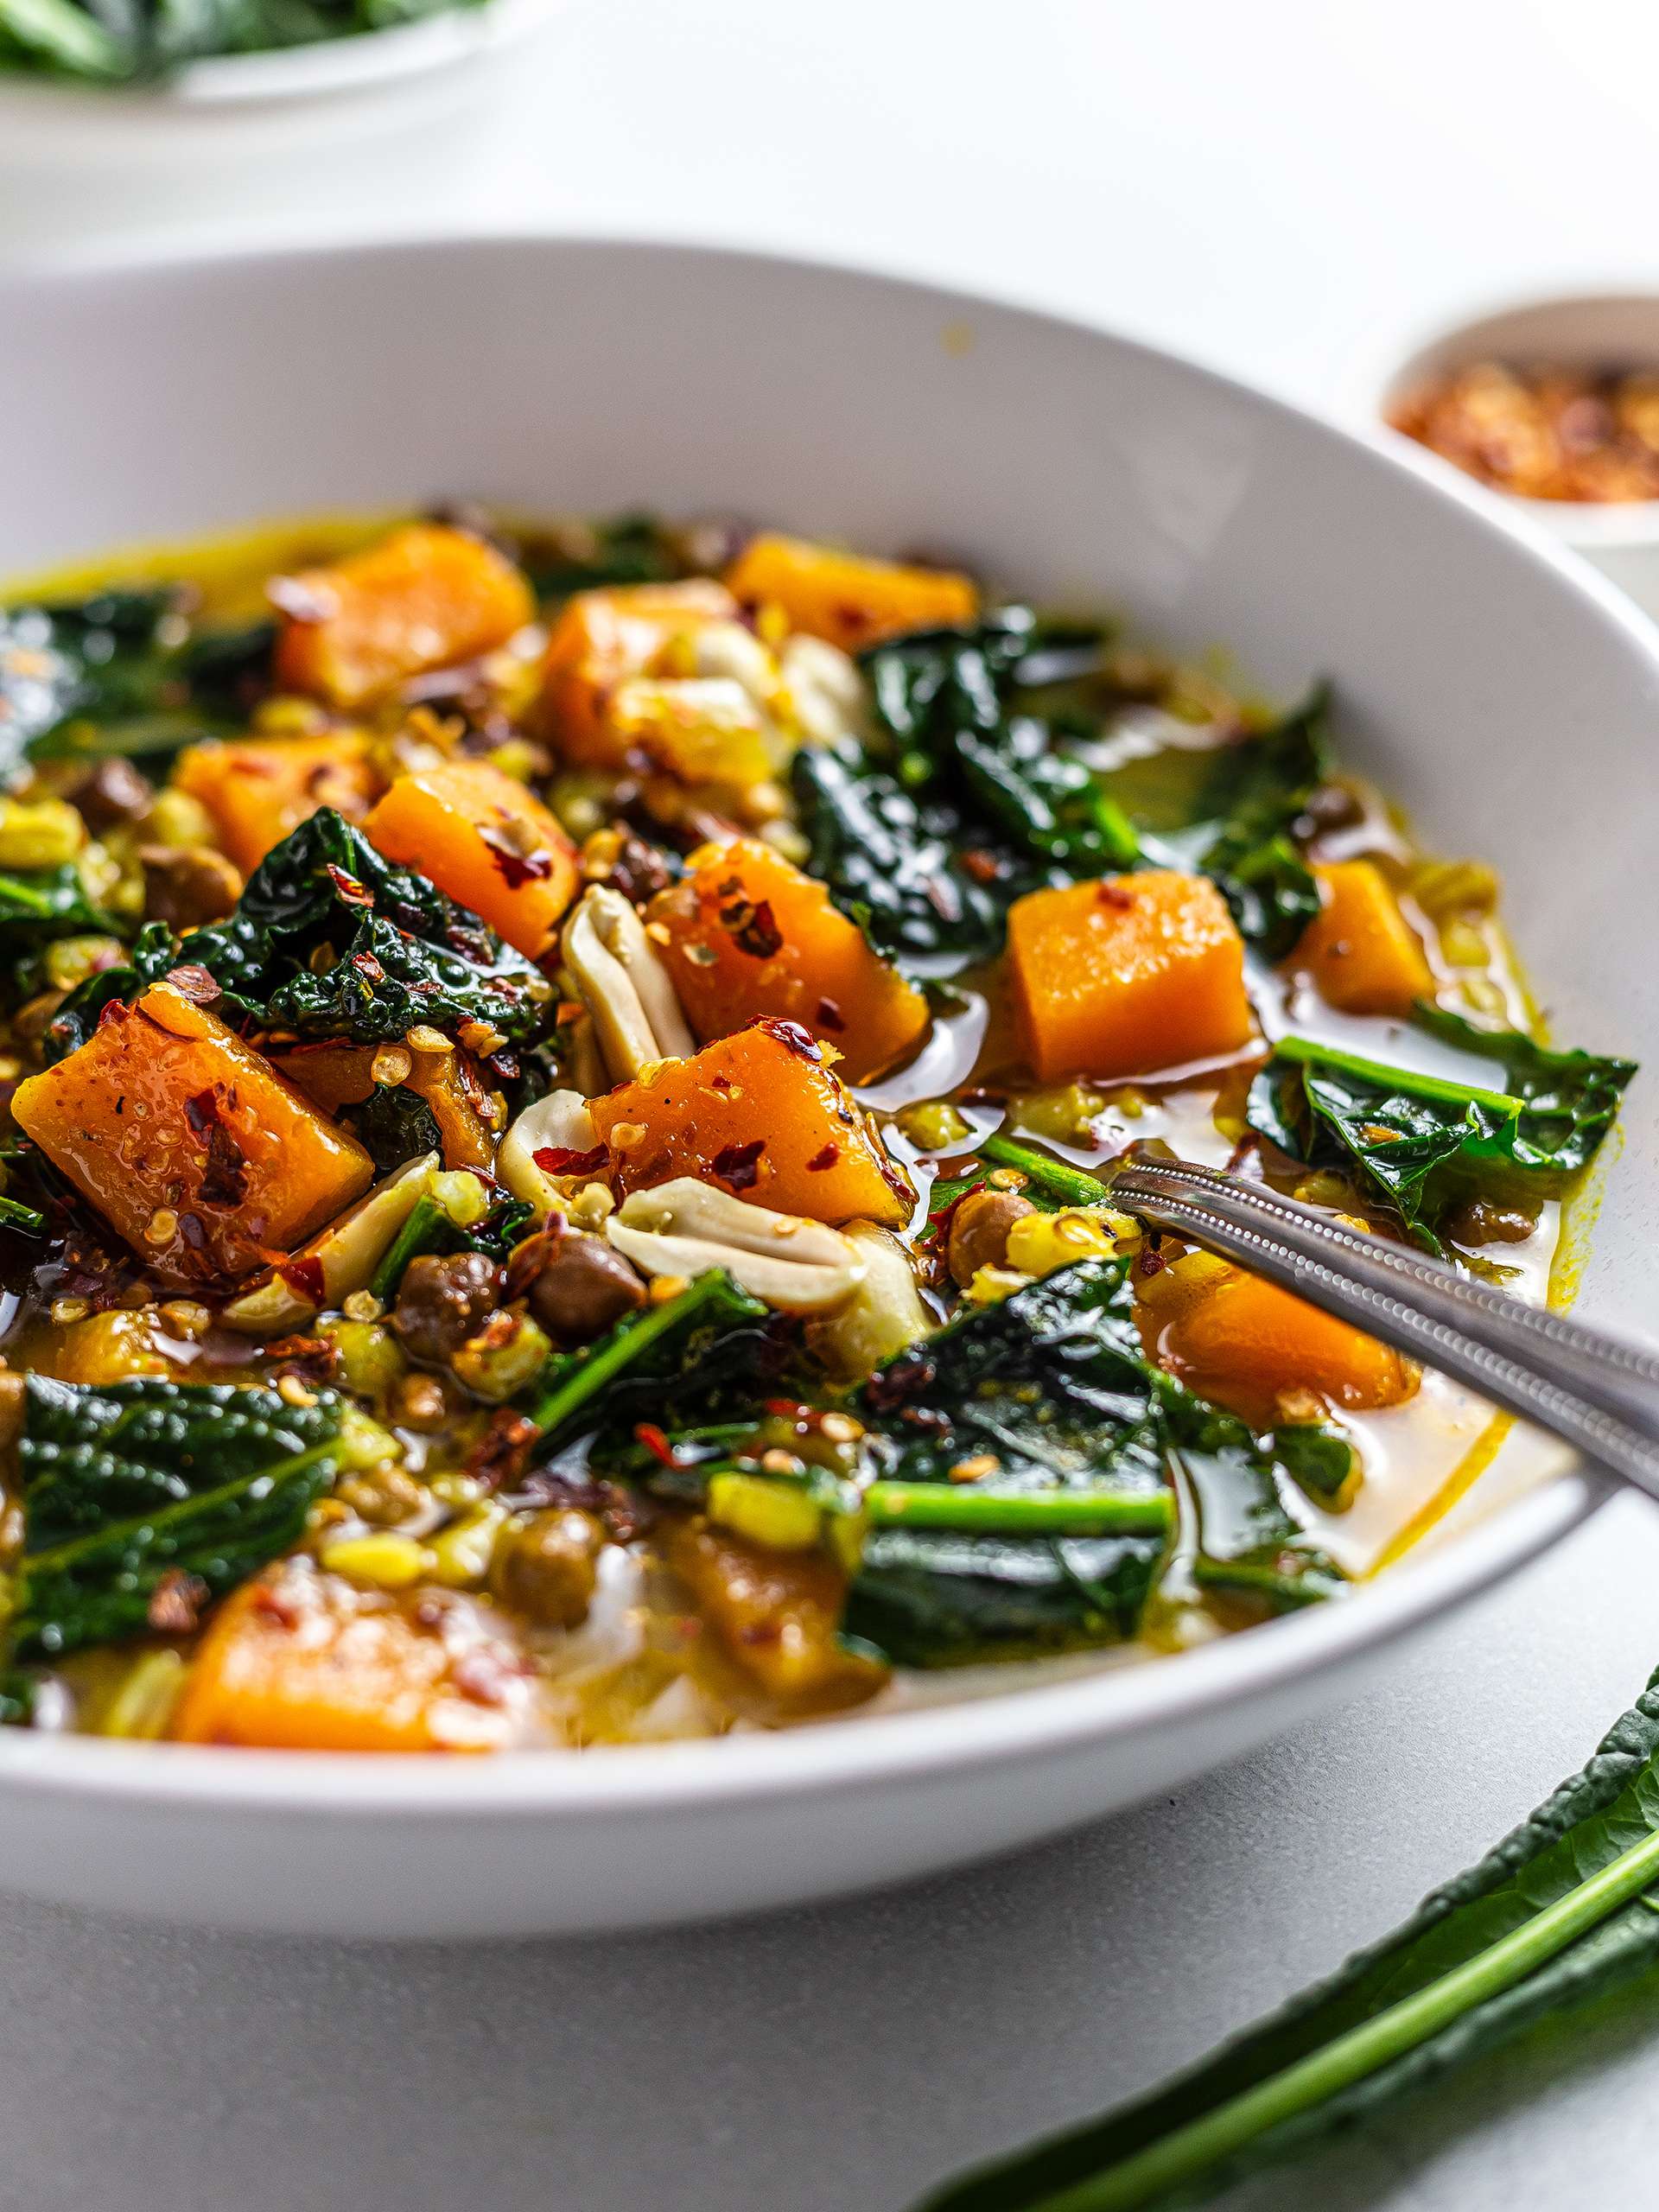 Pumpkin Kale Soup with Brown Chickpeas